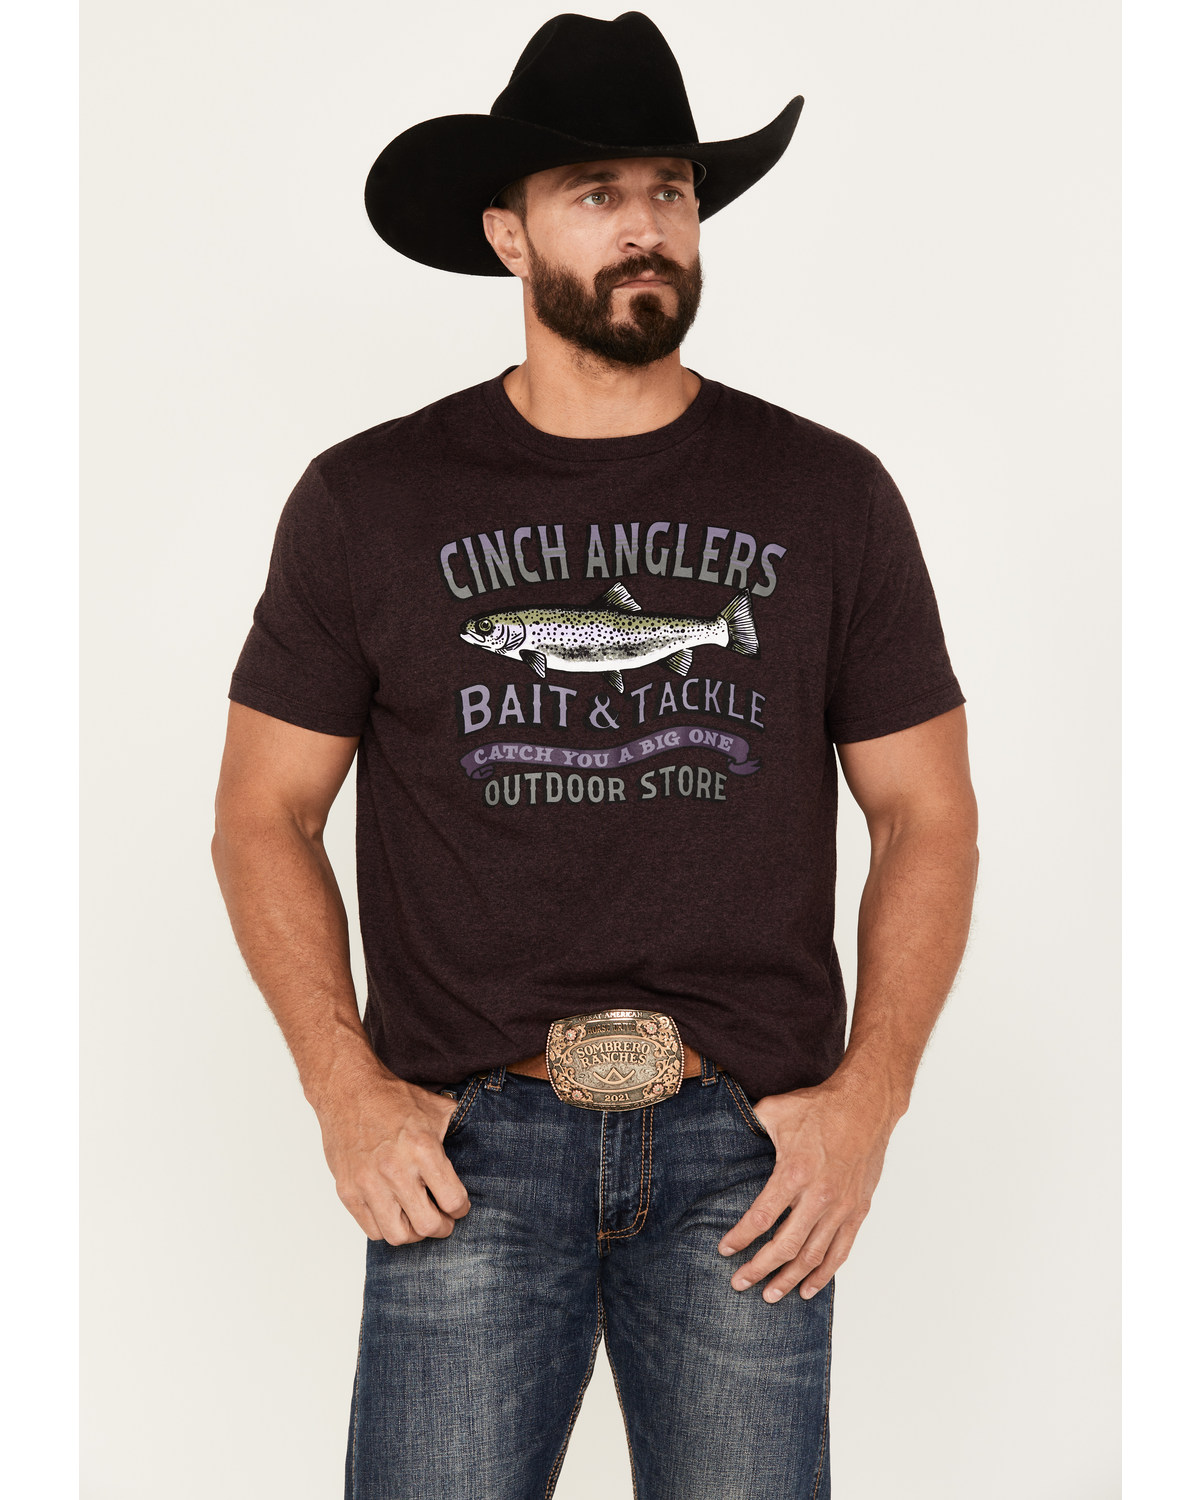 Cinch Men's Anglers Bait & Tackle Short Sleeve Graphic T-Shirt